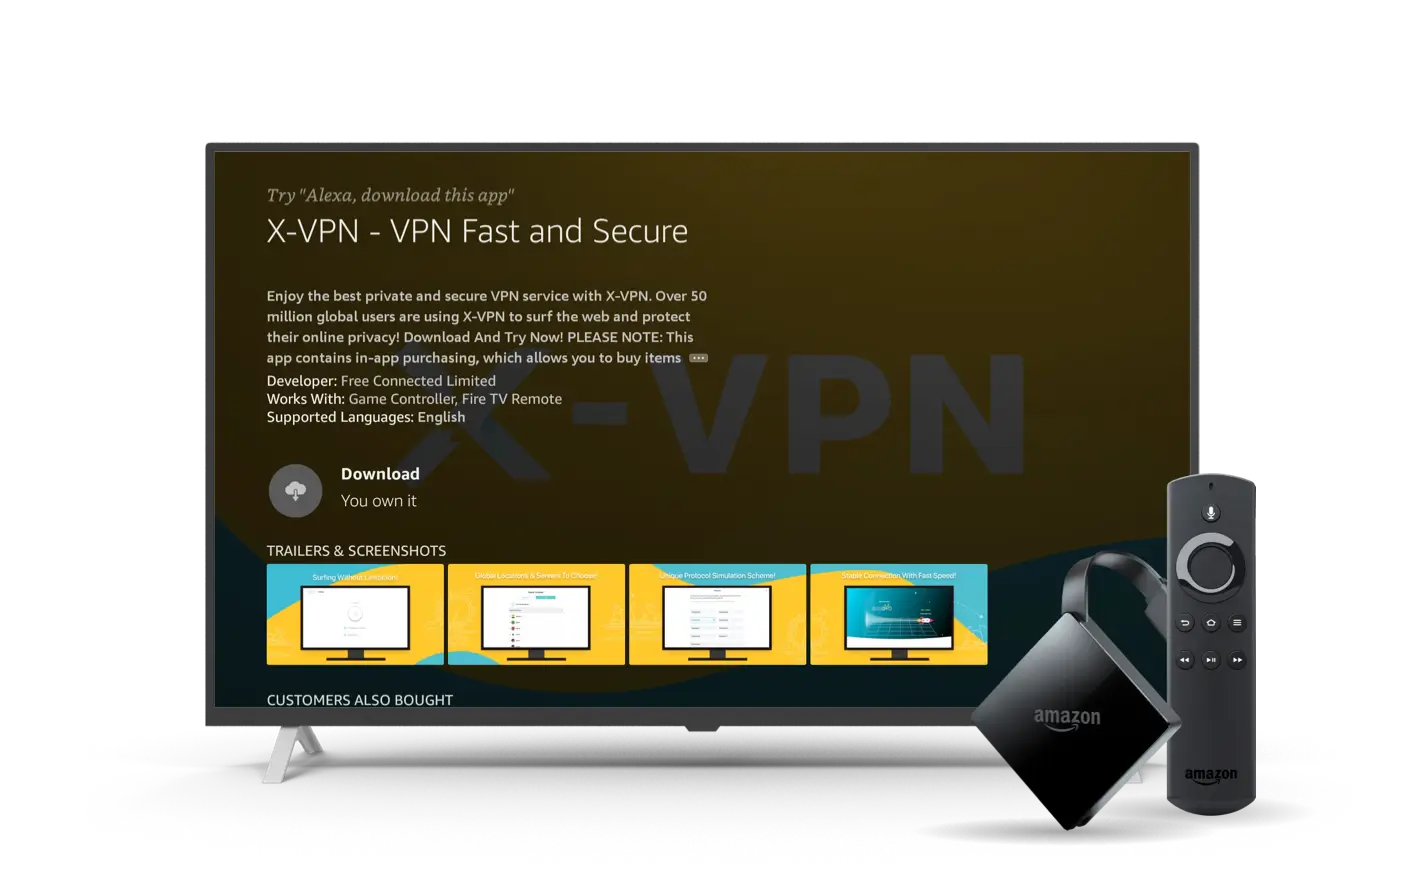 Download a VPN for Amazon TV